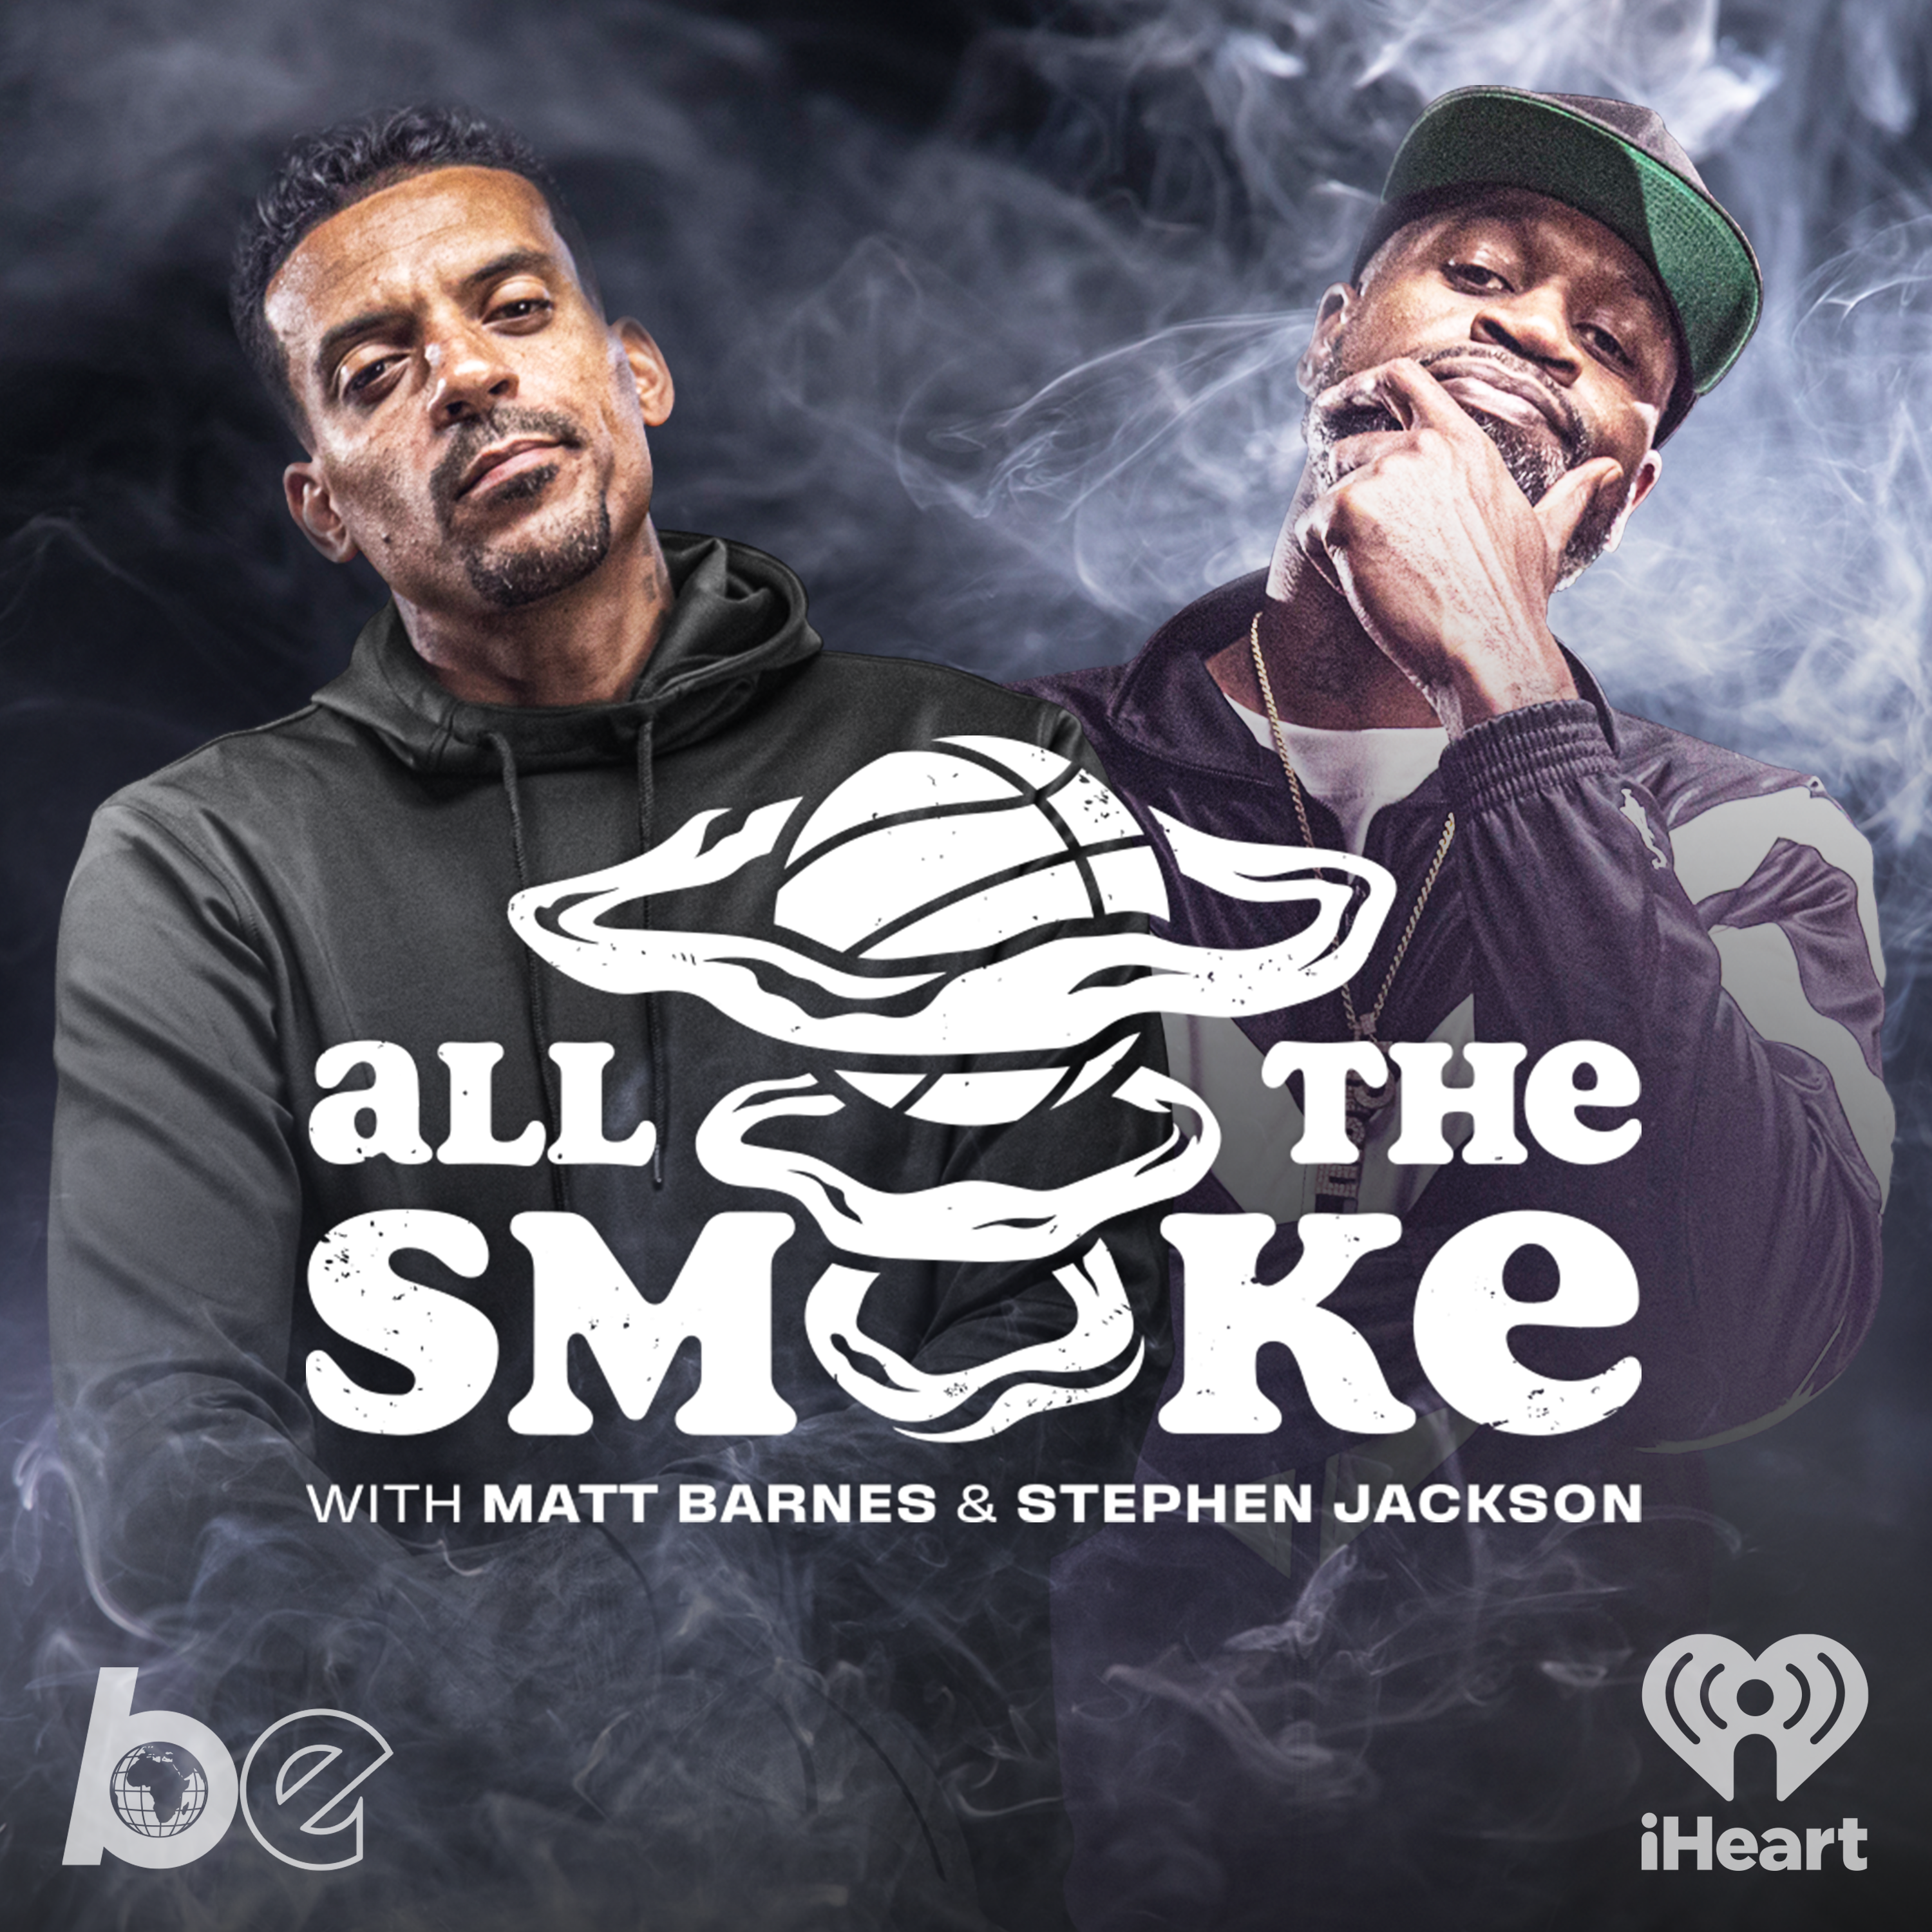 T.I. | Ep 170 | ALL THE SMOKE Full Episode | SHOWTIME Basketball